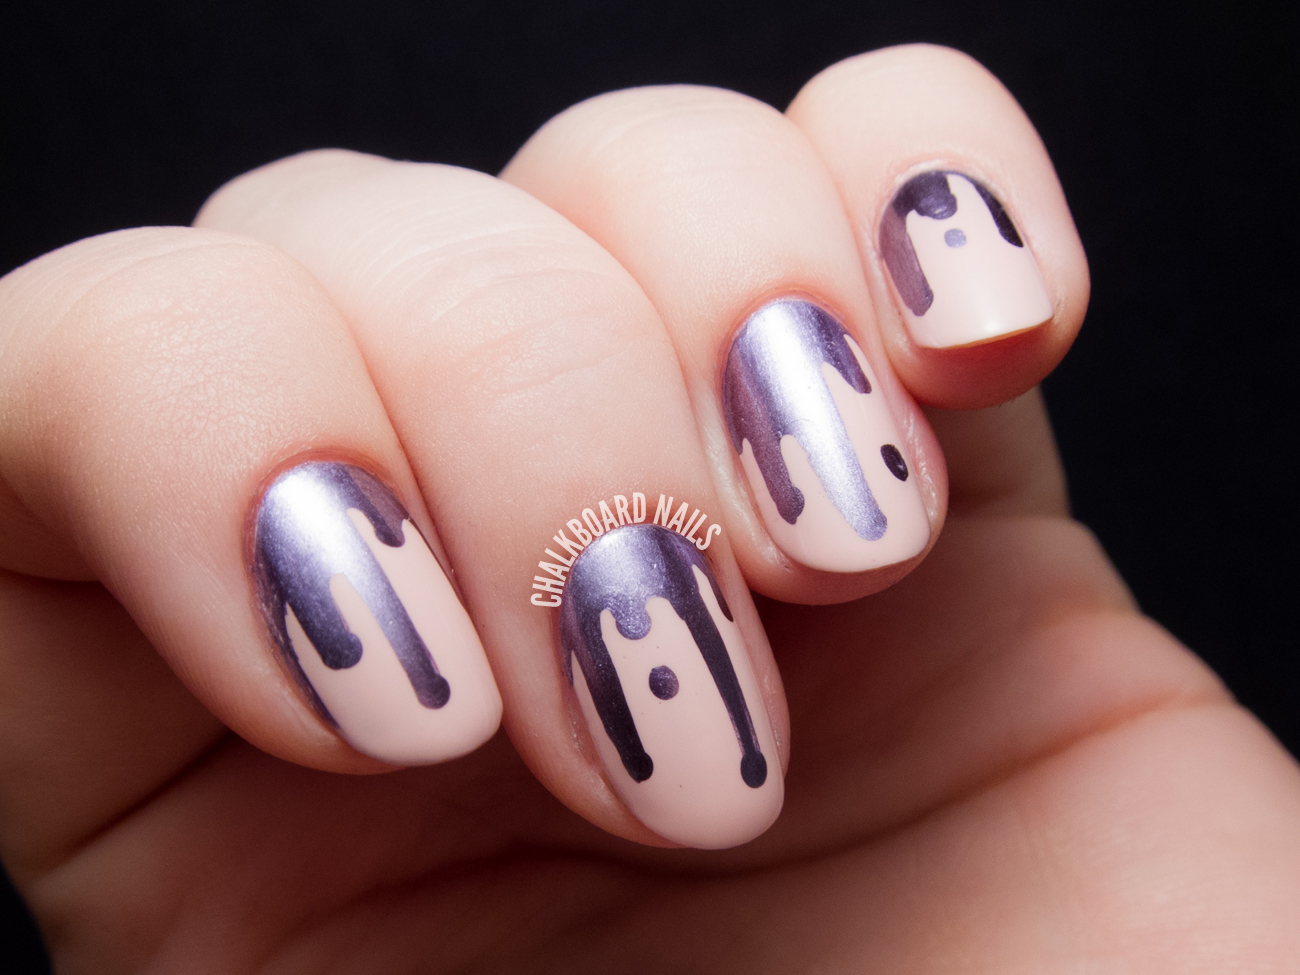 2. Cool Drip Nail Art with Black Background - wide 2